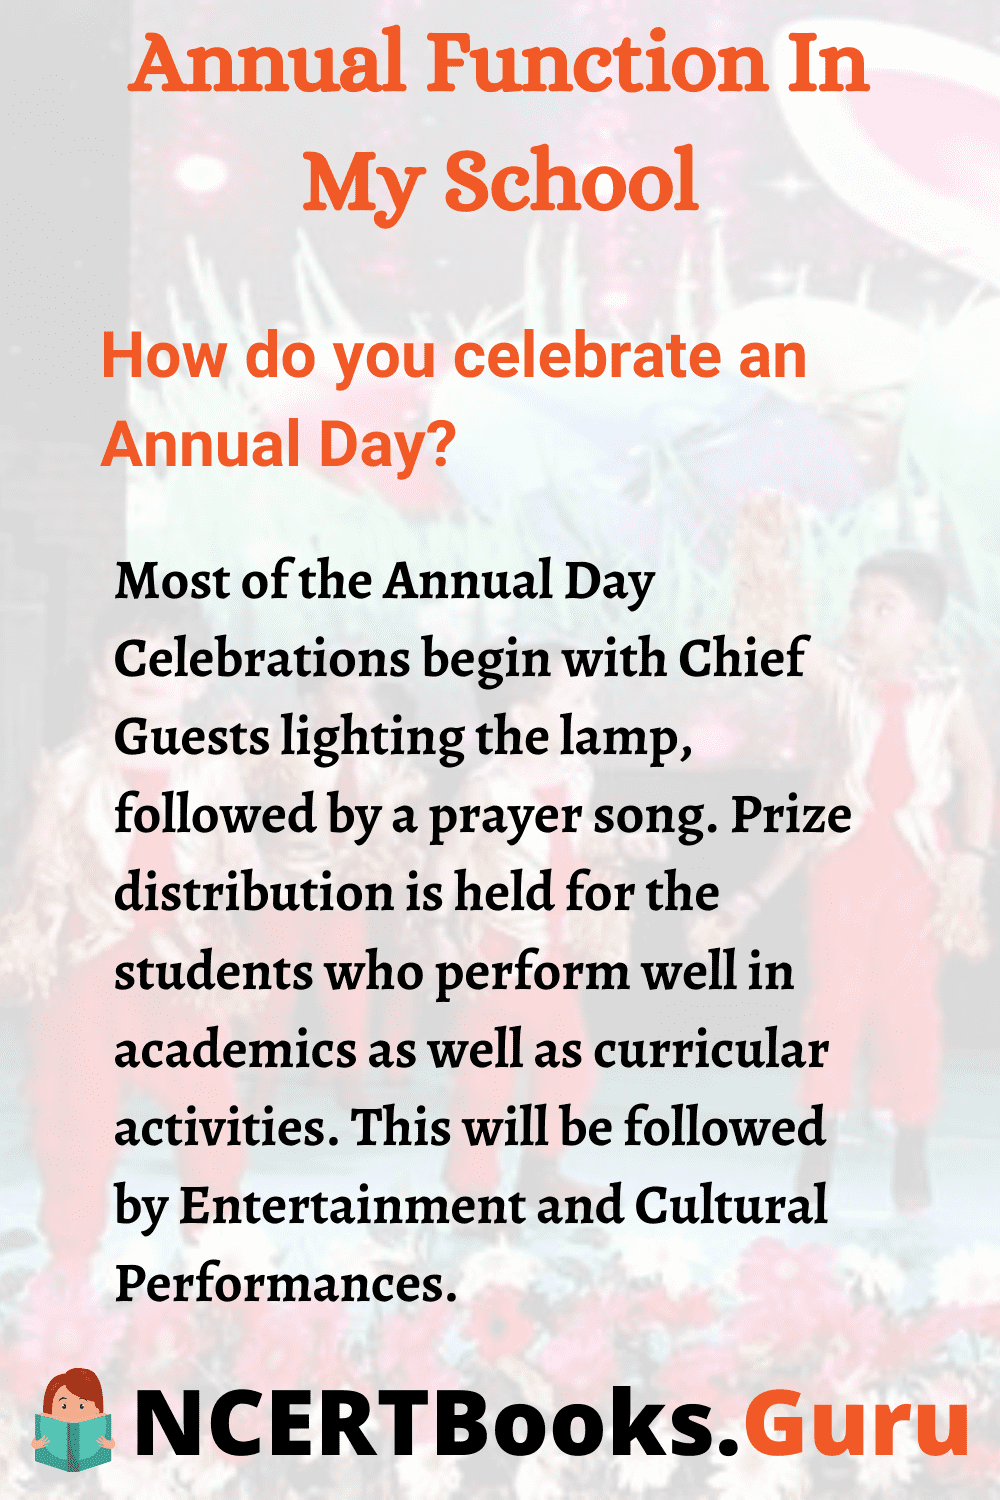 How to celebrate annual function in school?